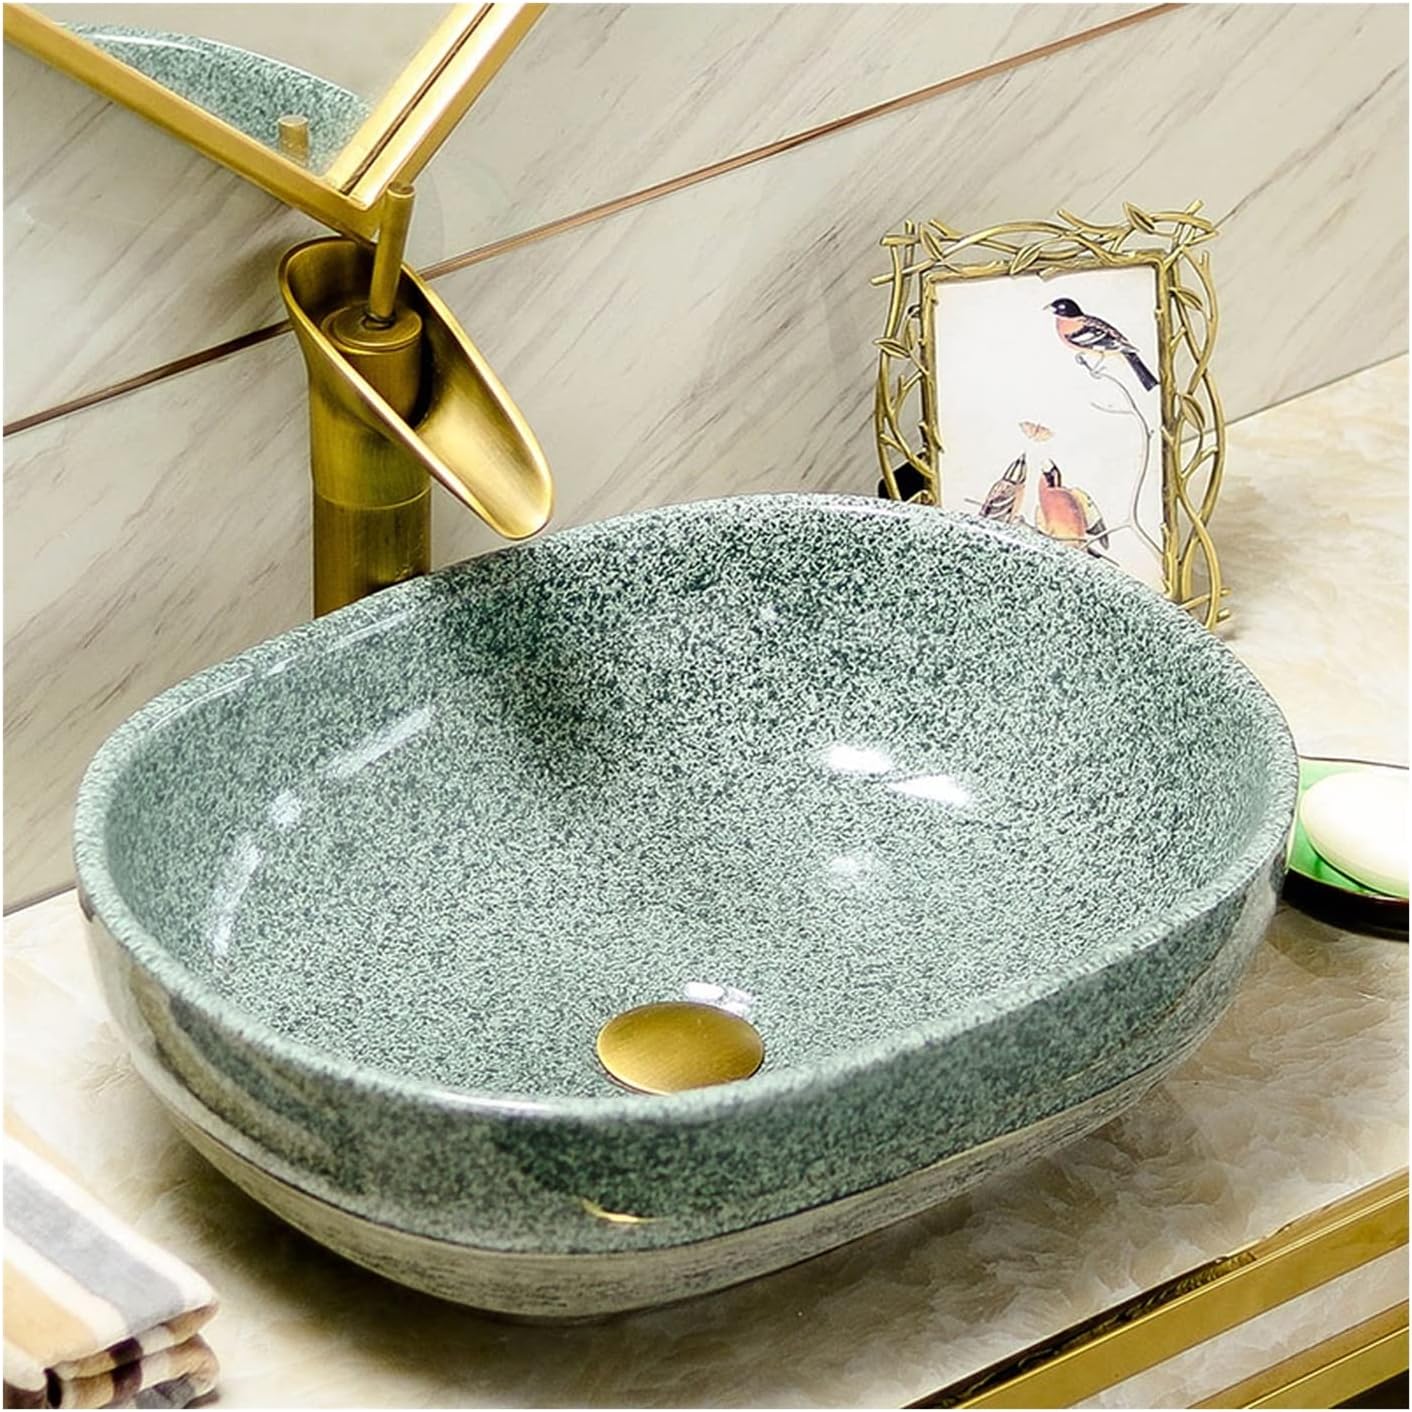 Bathroom Sink, Countertop Basin Oval Counter wash Basin Cloakroom Hand-Painted Container Sink Bathroom Sink Blue and White Porcelain Hand-Painted sink-51 cm-1 (40 Cm)